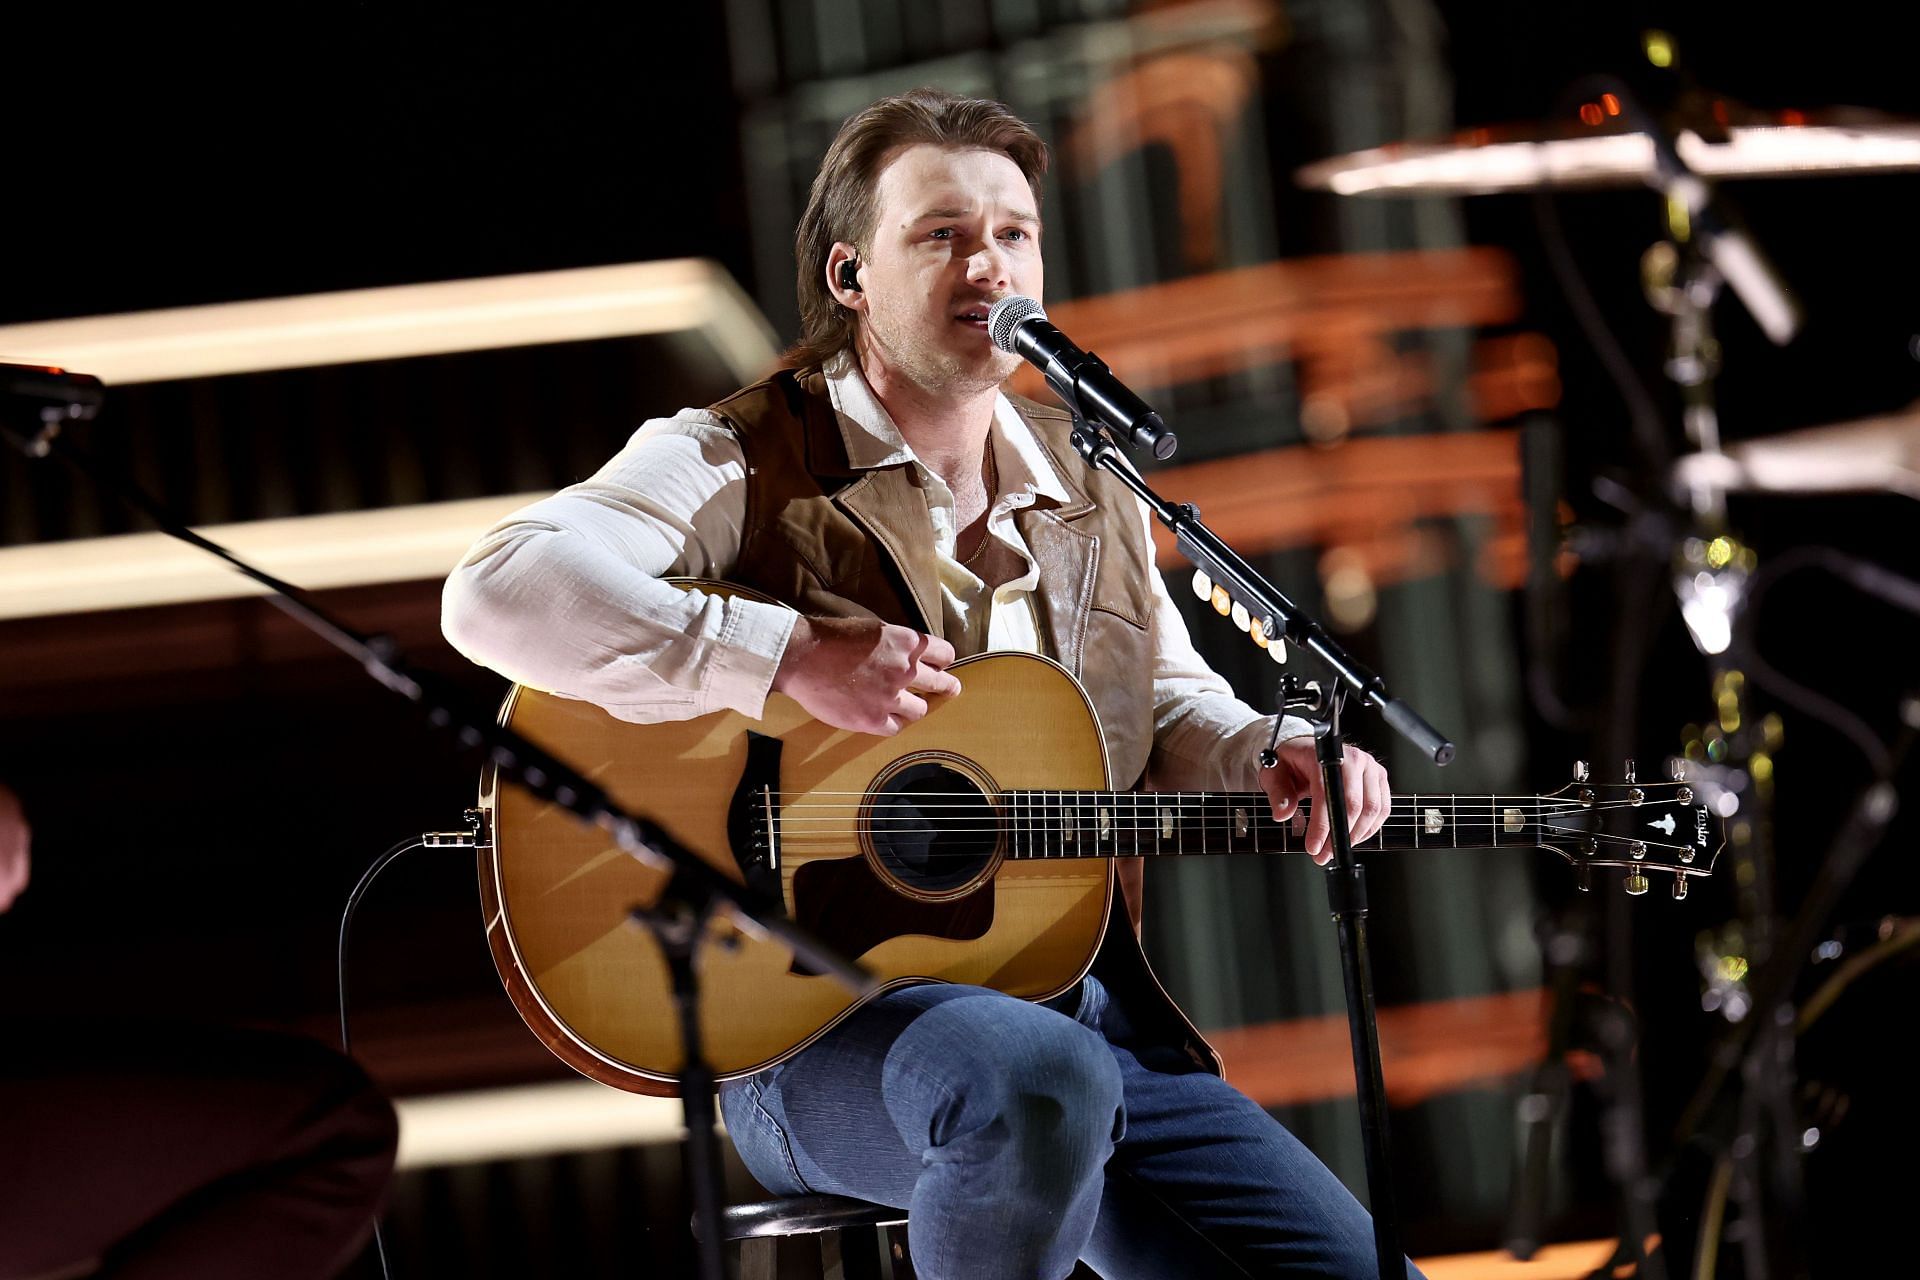 Morgan Wallen at the 2022 Billboard Music Awards (Photo by Getty Images)